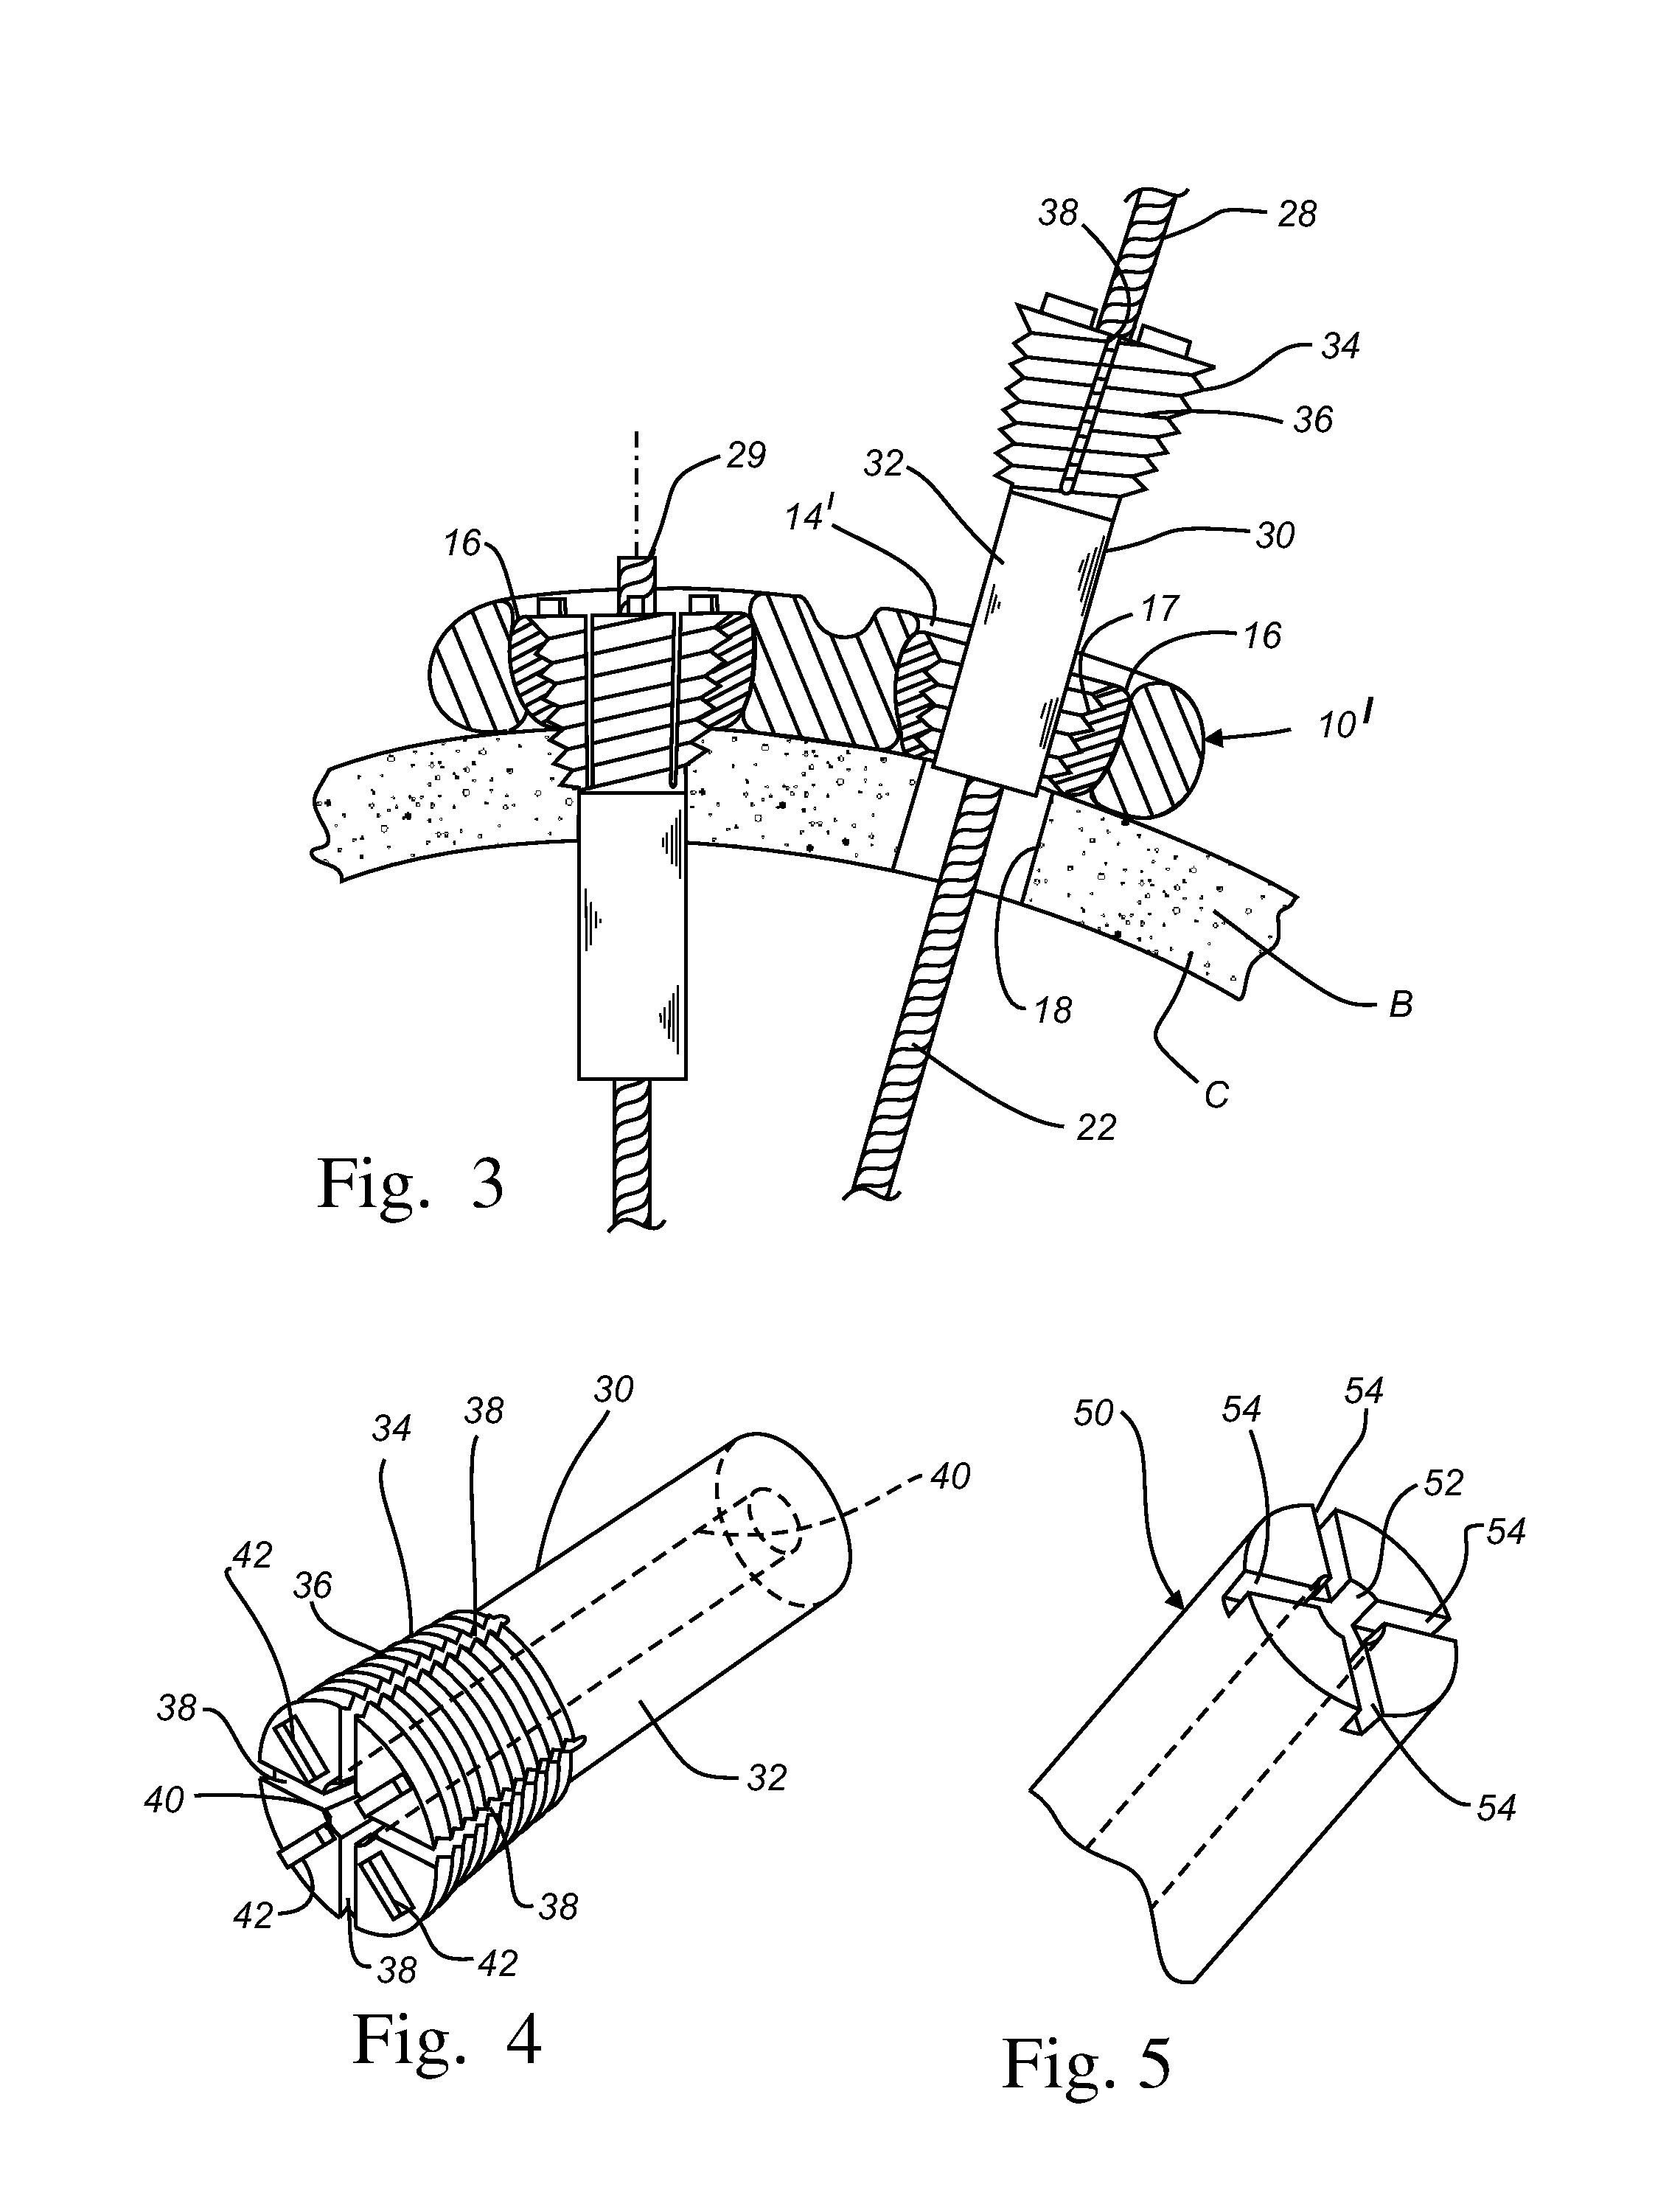 Fastening system for internal fixation